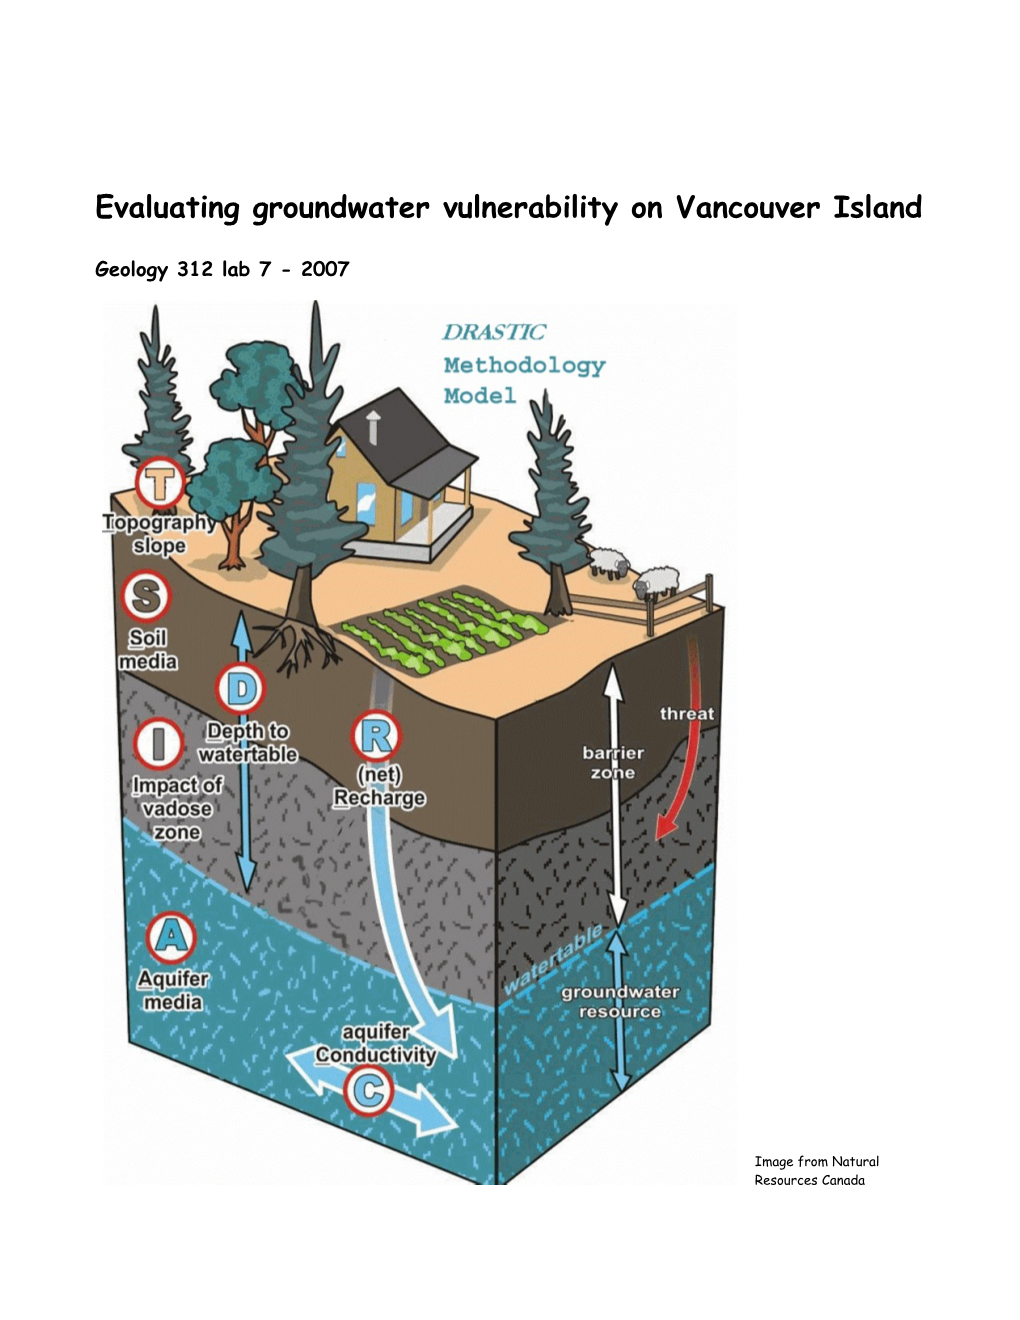 Evaluating Groundwater Vulnerability on Vancouver Island